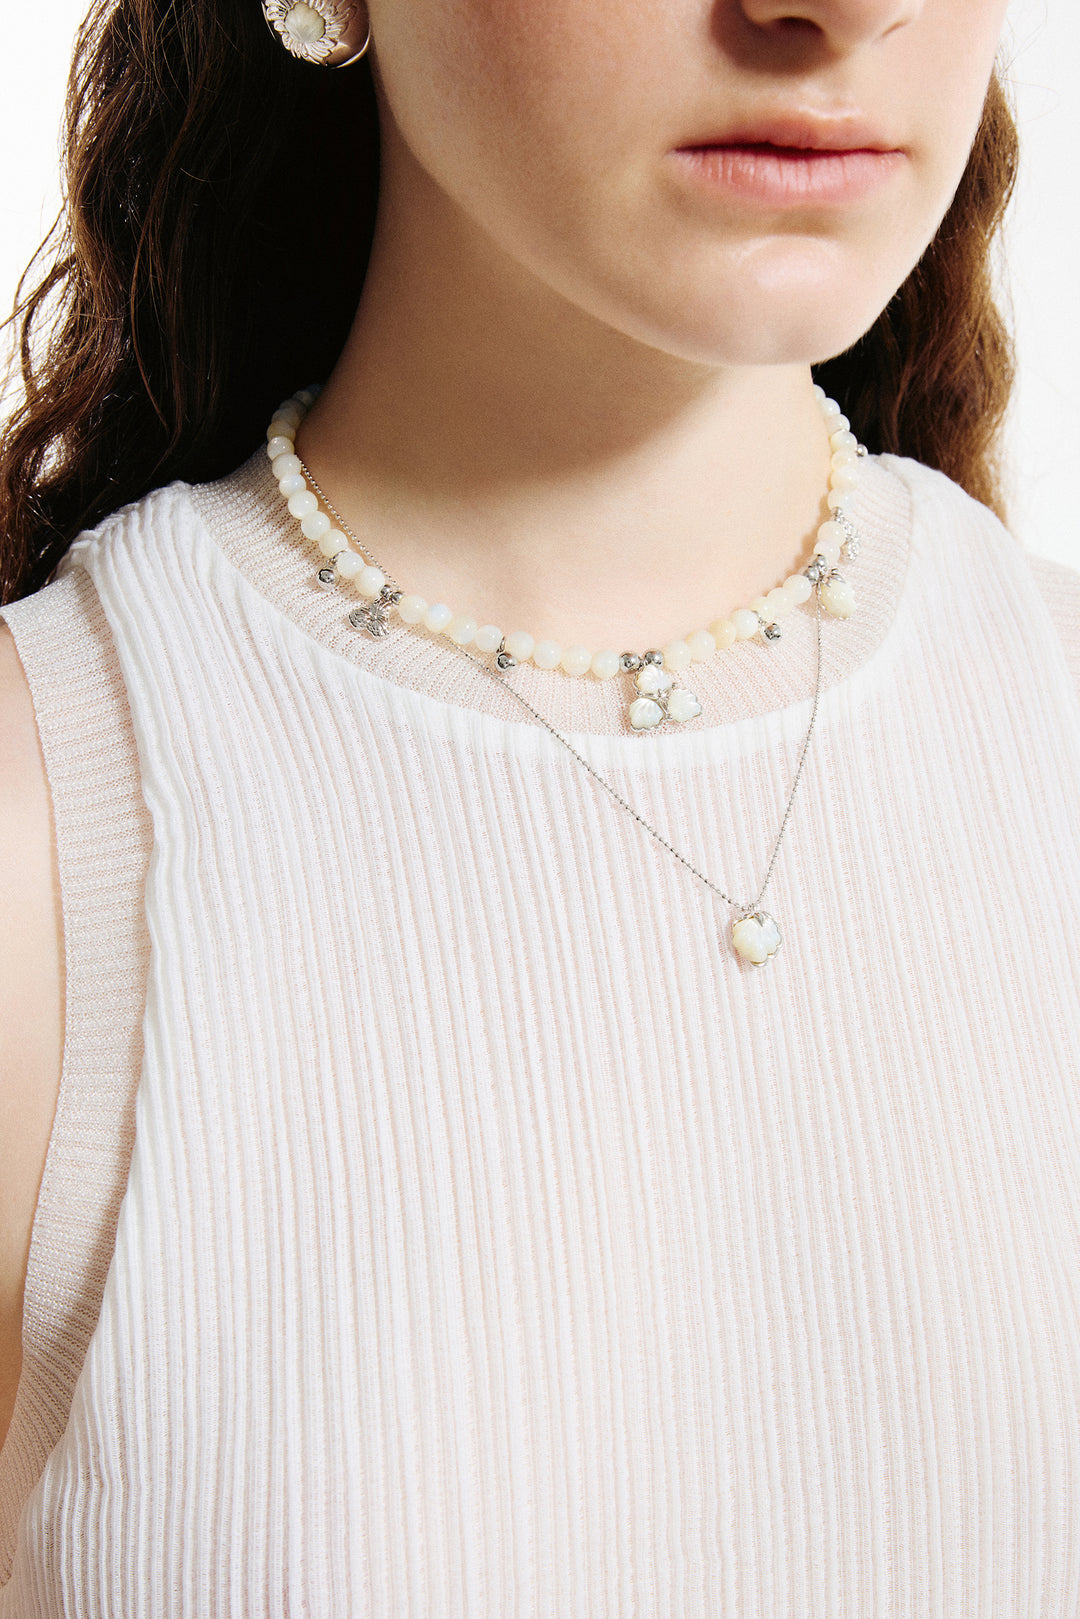 Berry Necklace in Mother of Pearl